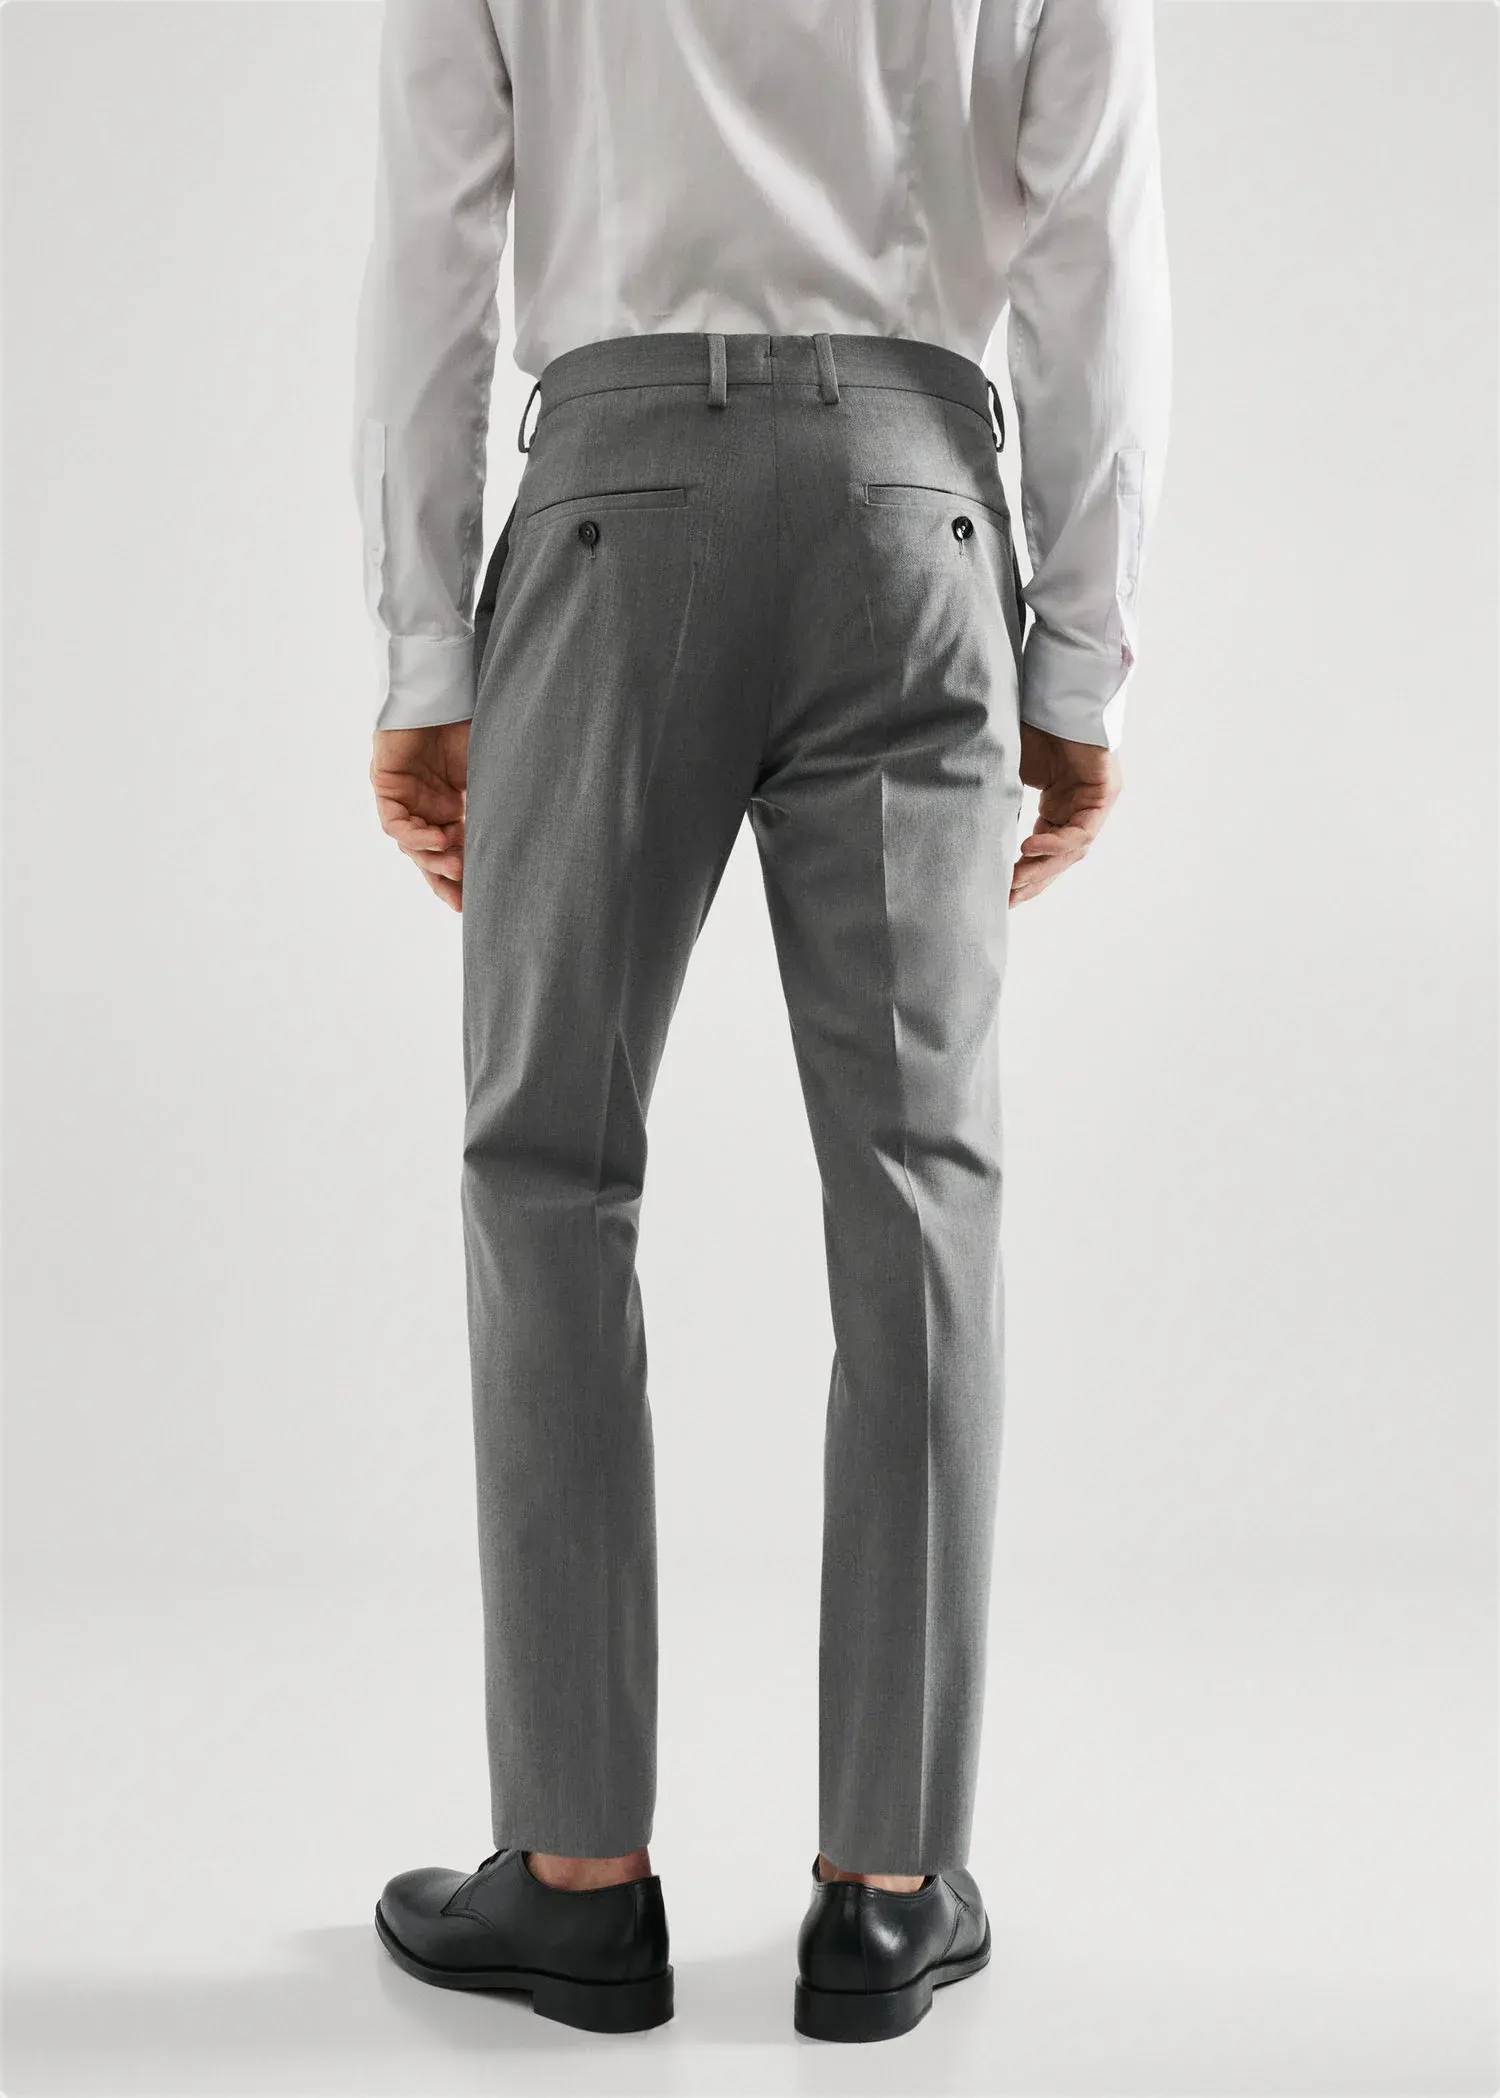 Mango Stretch fabric super slim-fit suit pants. a man wearing a suit standing in front of a white wall. 